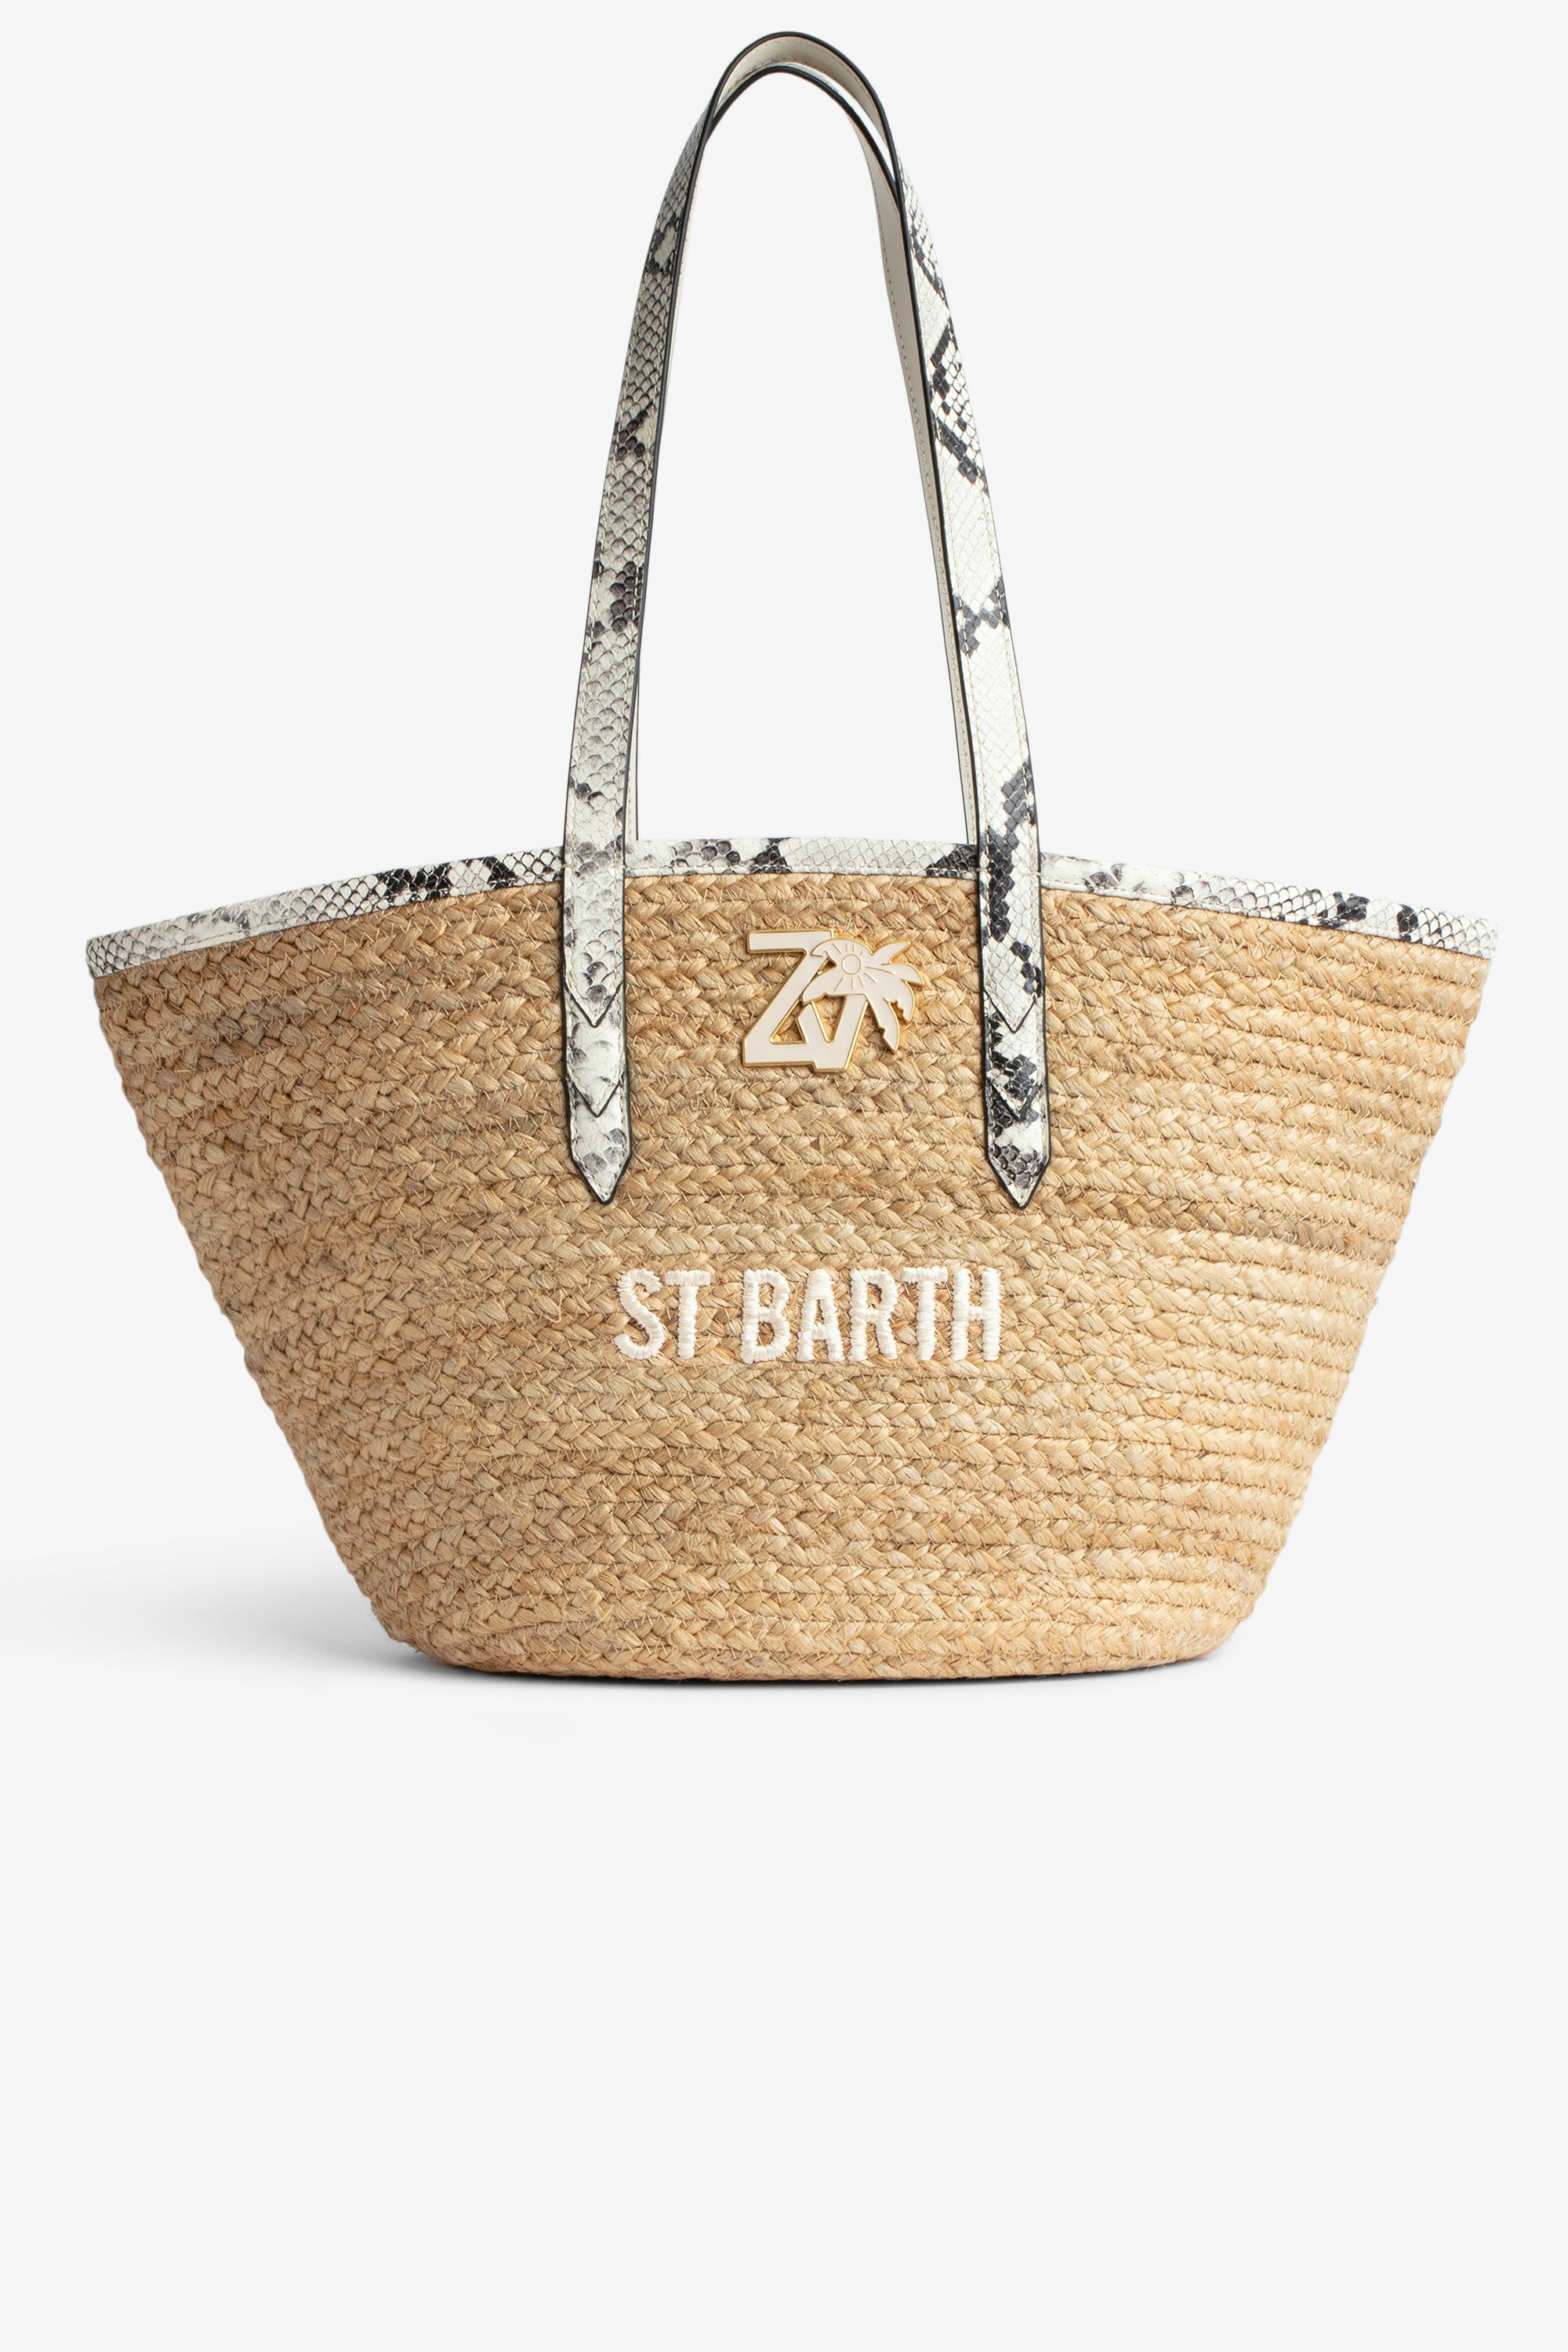 Le Beach Bag Women's straw bag with off-white snakeskin-effect leather handles, "St Barth" embroidery and ZV charm